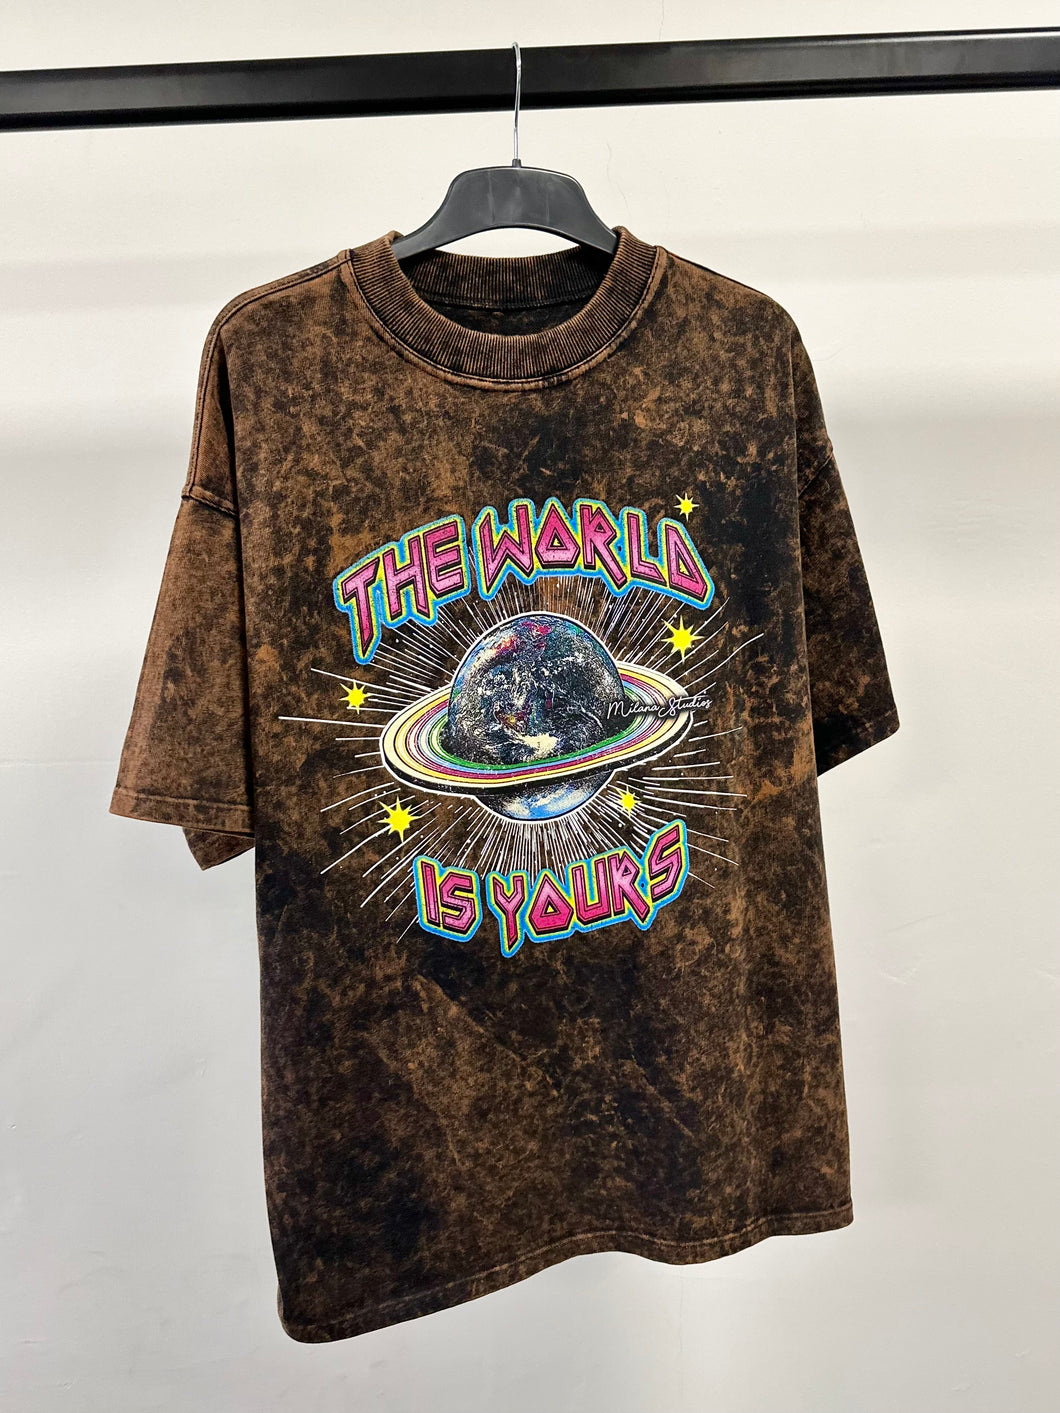 Washed Effect Planet Heavyweight T-shirt.